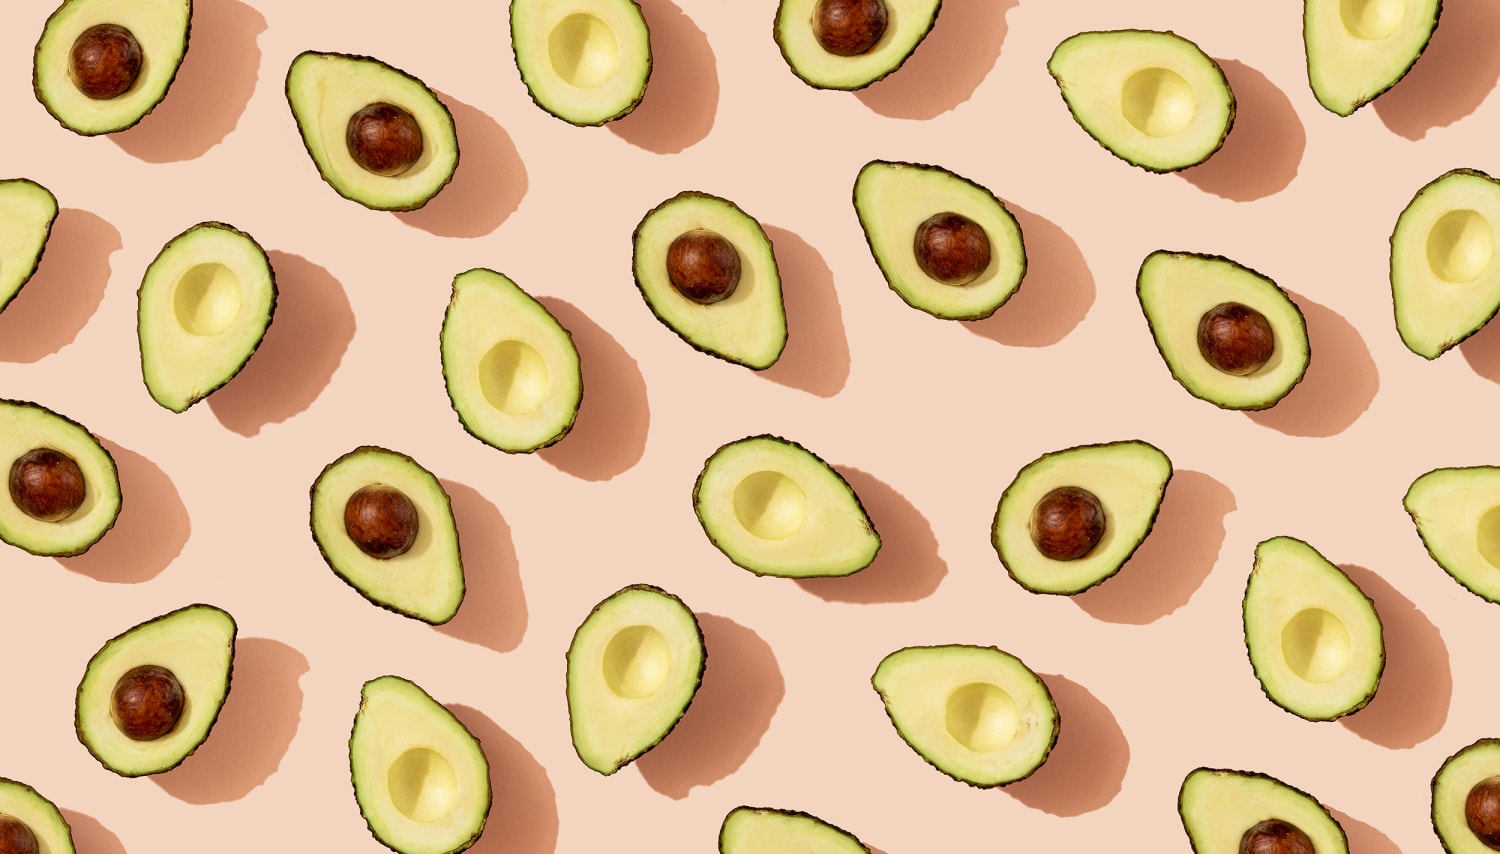 Is it healthy to eat avocado every day?